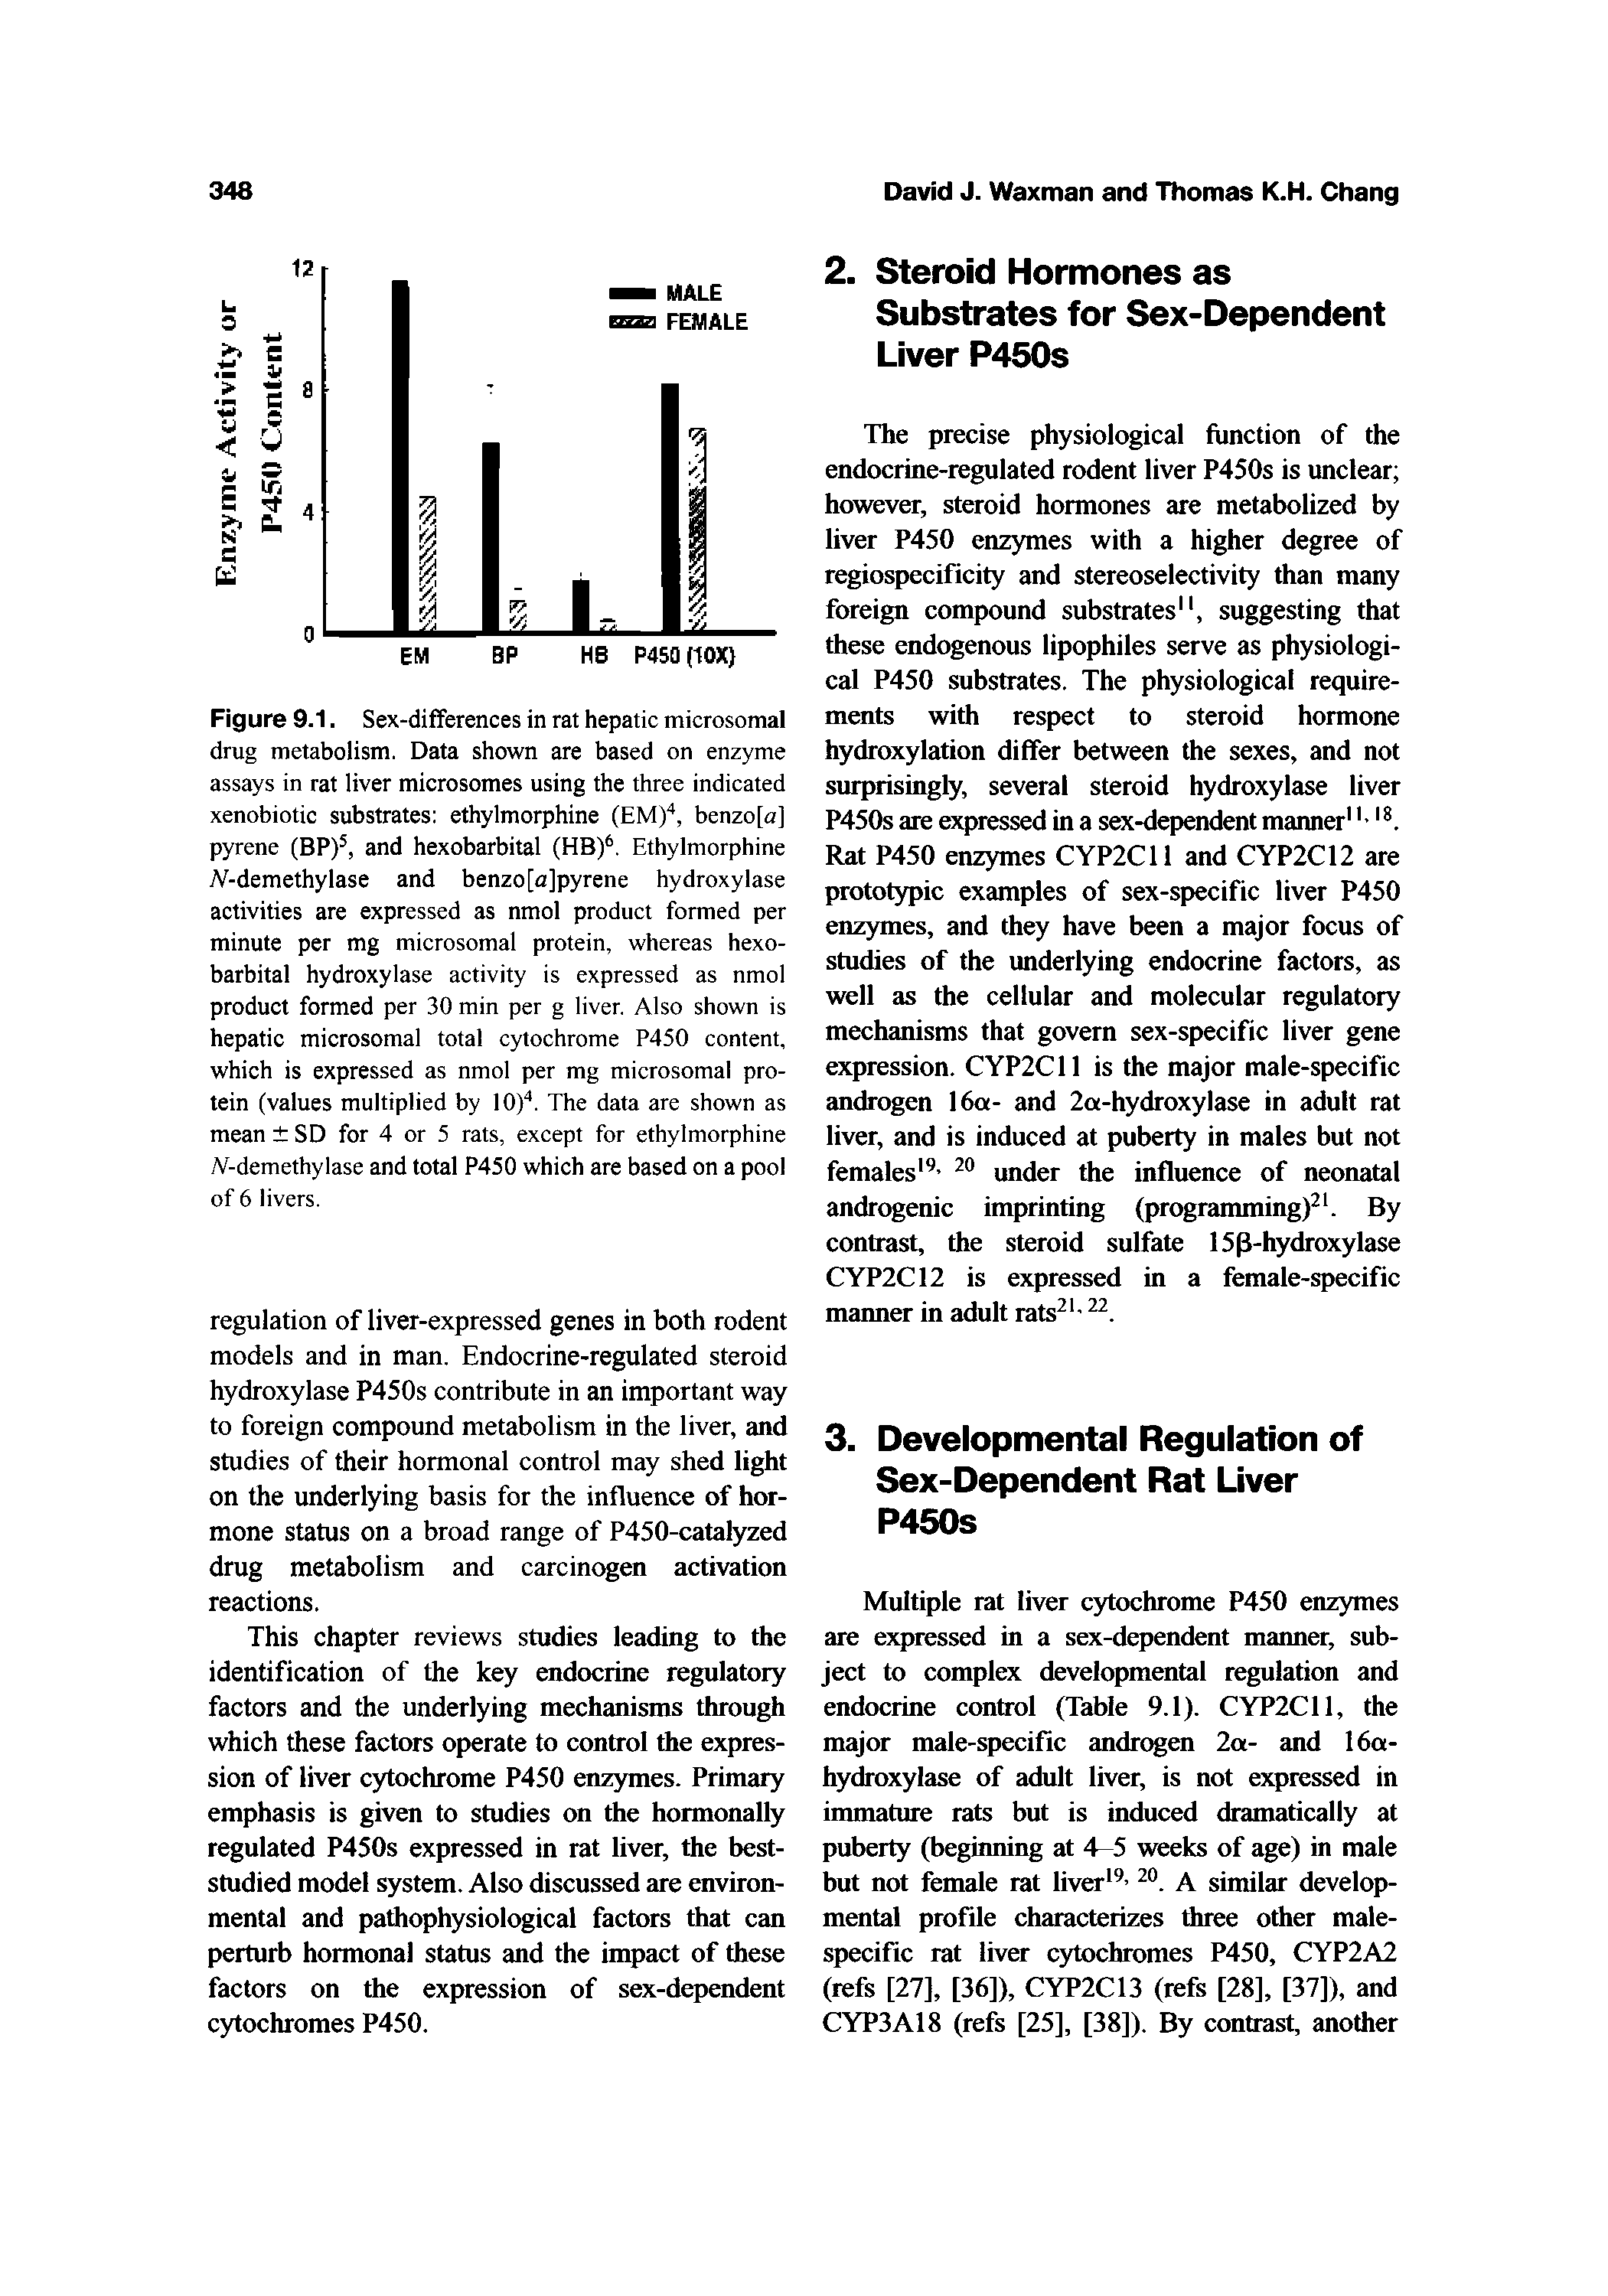 Figure 9.1. Sex-differences in rat hepatic microsomal drug metabolism. Data shown are based on enzyme assays in rat liver microsomes using the three indicated xenobiotic substrates ethylmorphine (EM), benzo[o] pyrene (BP), and hexobarbital (HB). Ethylmorphine A -demethylase and benzo[a]pyrene hydroxylase activities are expressed as nmol product formed per minute per mg microsomal protein, whereas hexobarbital hydroxylase activity is expressed as nmol product formed per 30 min per g liver. Also shown is hepatic microsomal total cytochrome P450 content, which is expressed as nmol per mg microsomal protein (values multiplied by 10). The data are shown as mean SD for 4 or 5 rats, except for ethylmorphine W-demethylase and total P450 which are based on a pool of 6 livers.